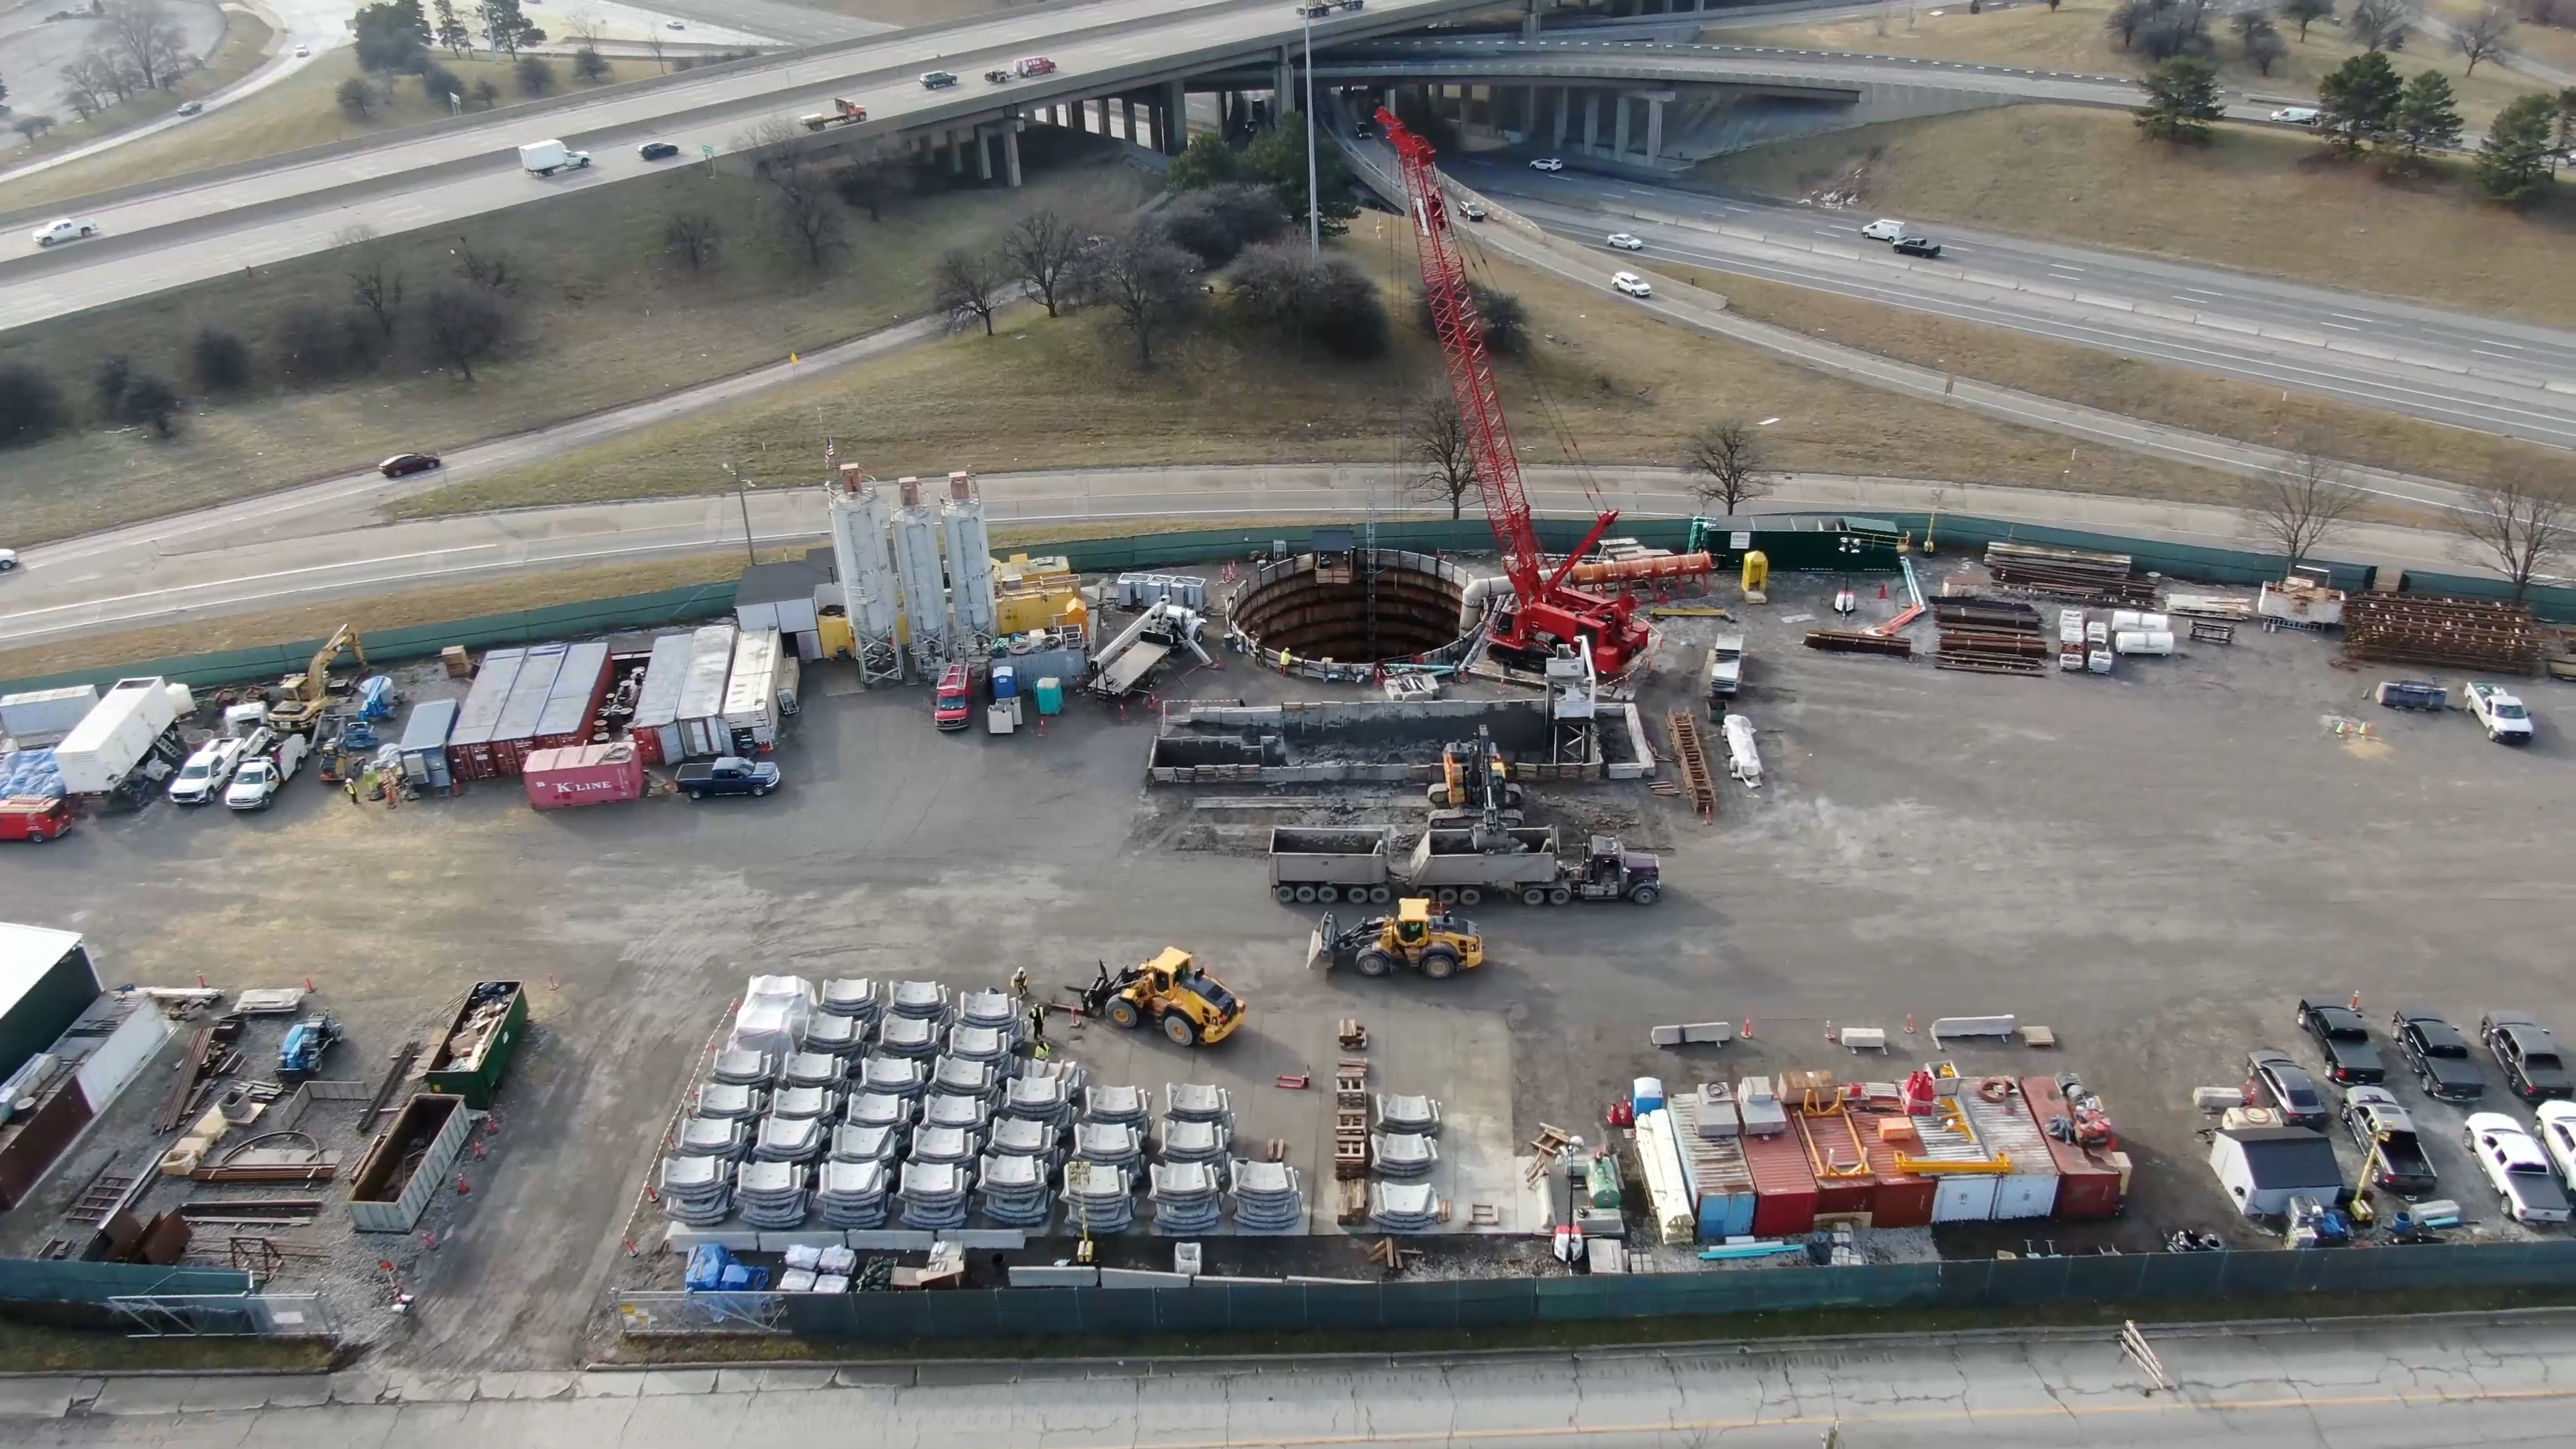 Aerial view of the I-696 shaft shite showing the cement casings and tunnel equipment